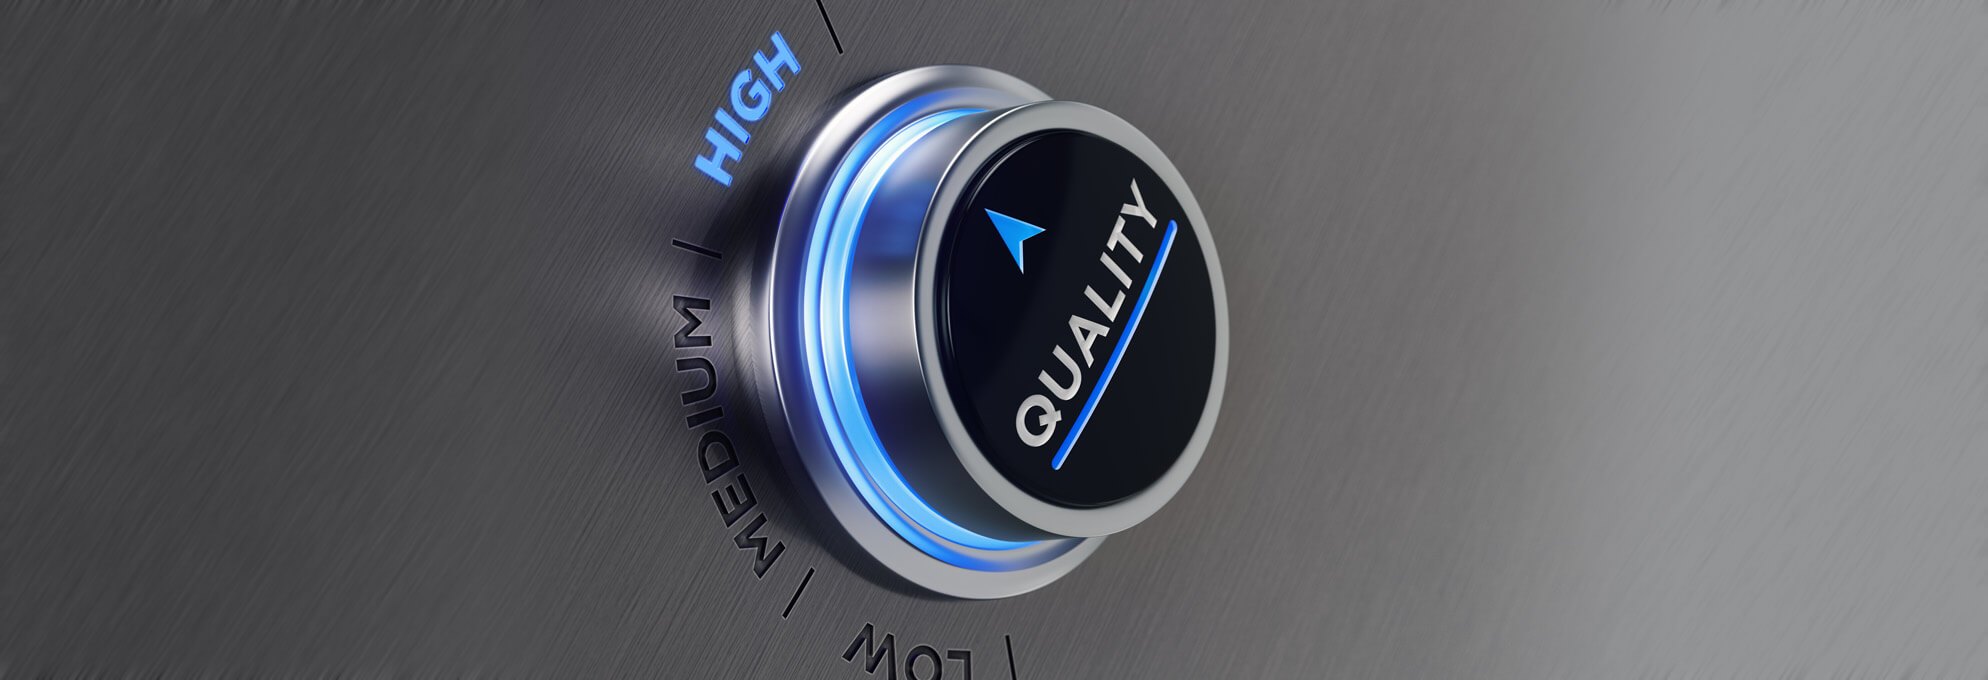 Industry Remains Divided on Quality Management Maturity Proposal